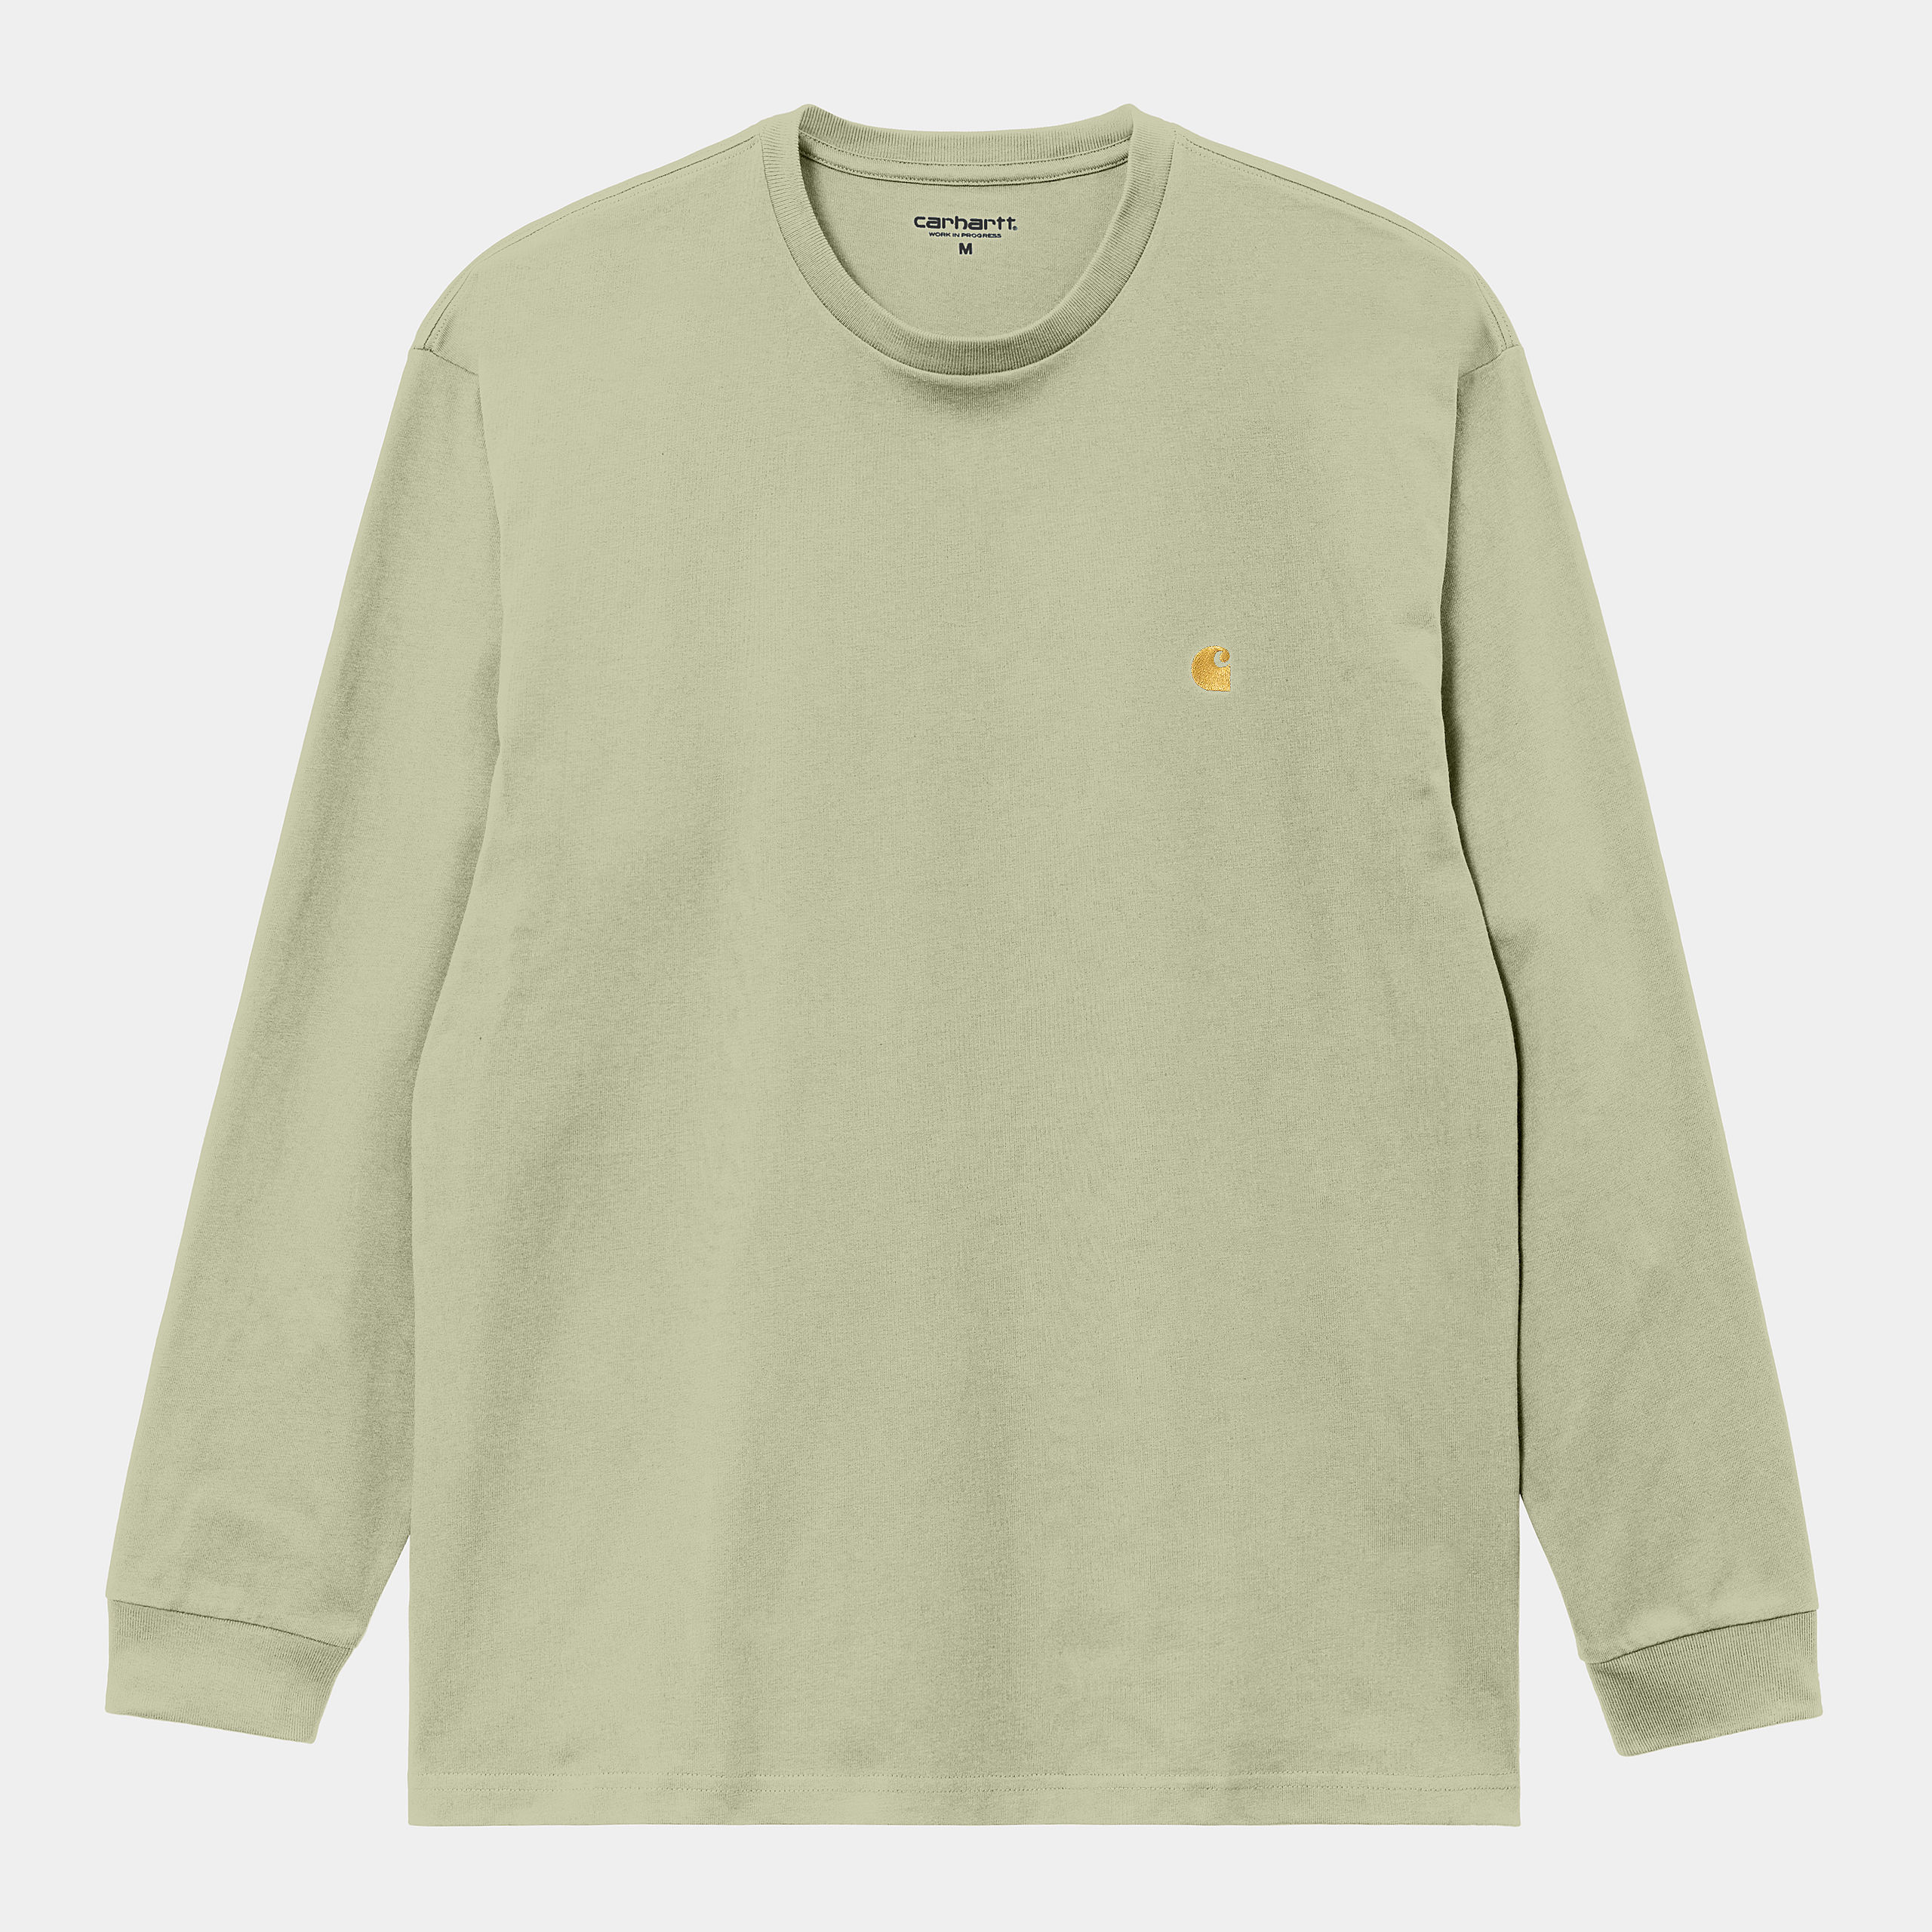 Carhartt WIP - L/S CHASE T-SHIRT - Agave/Gold